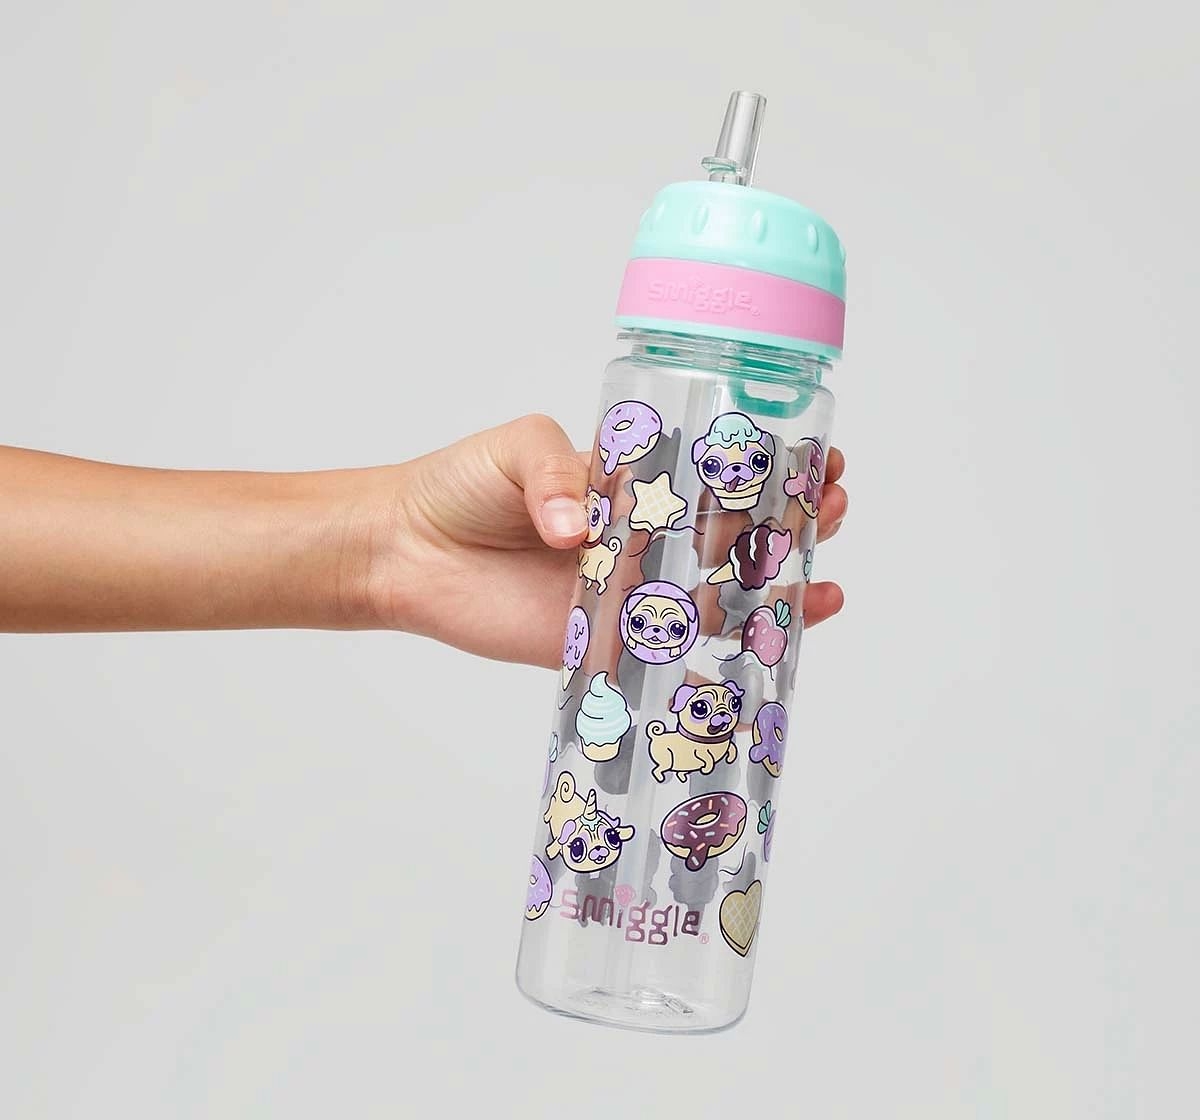 Smiggle Hey There Collection Bottles Plastic, Mint, 4Y+